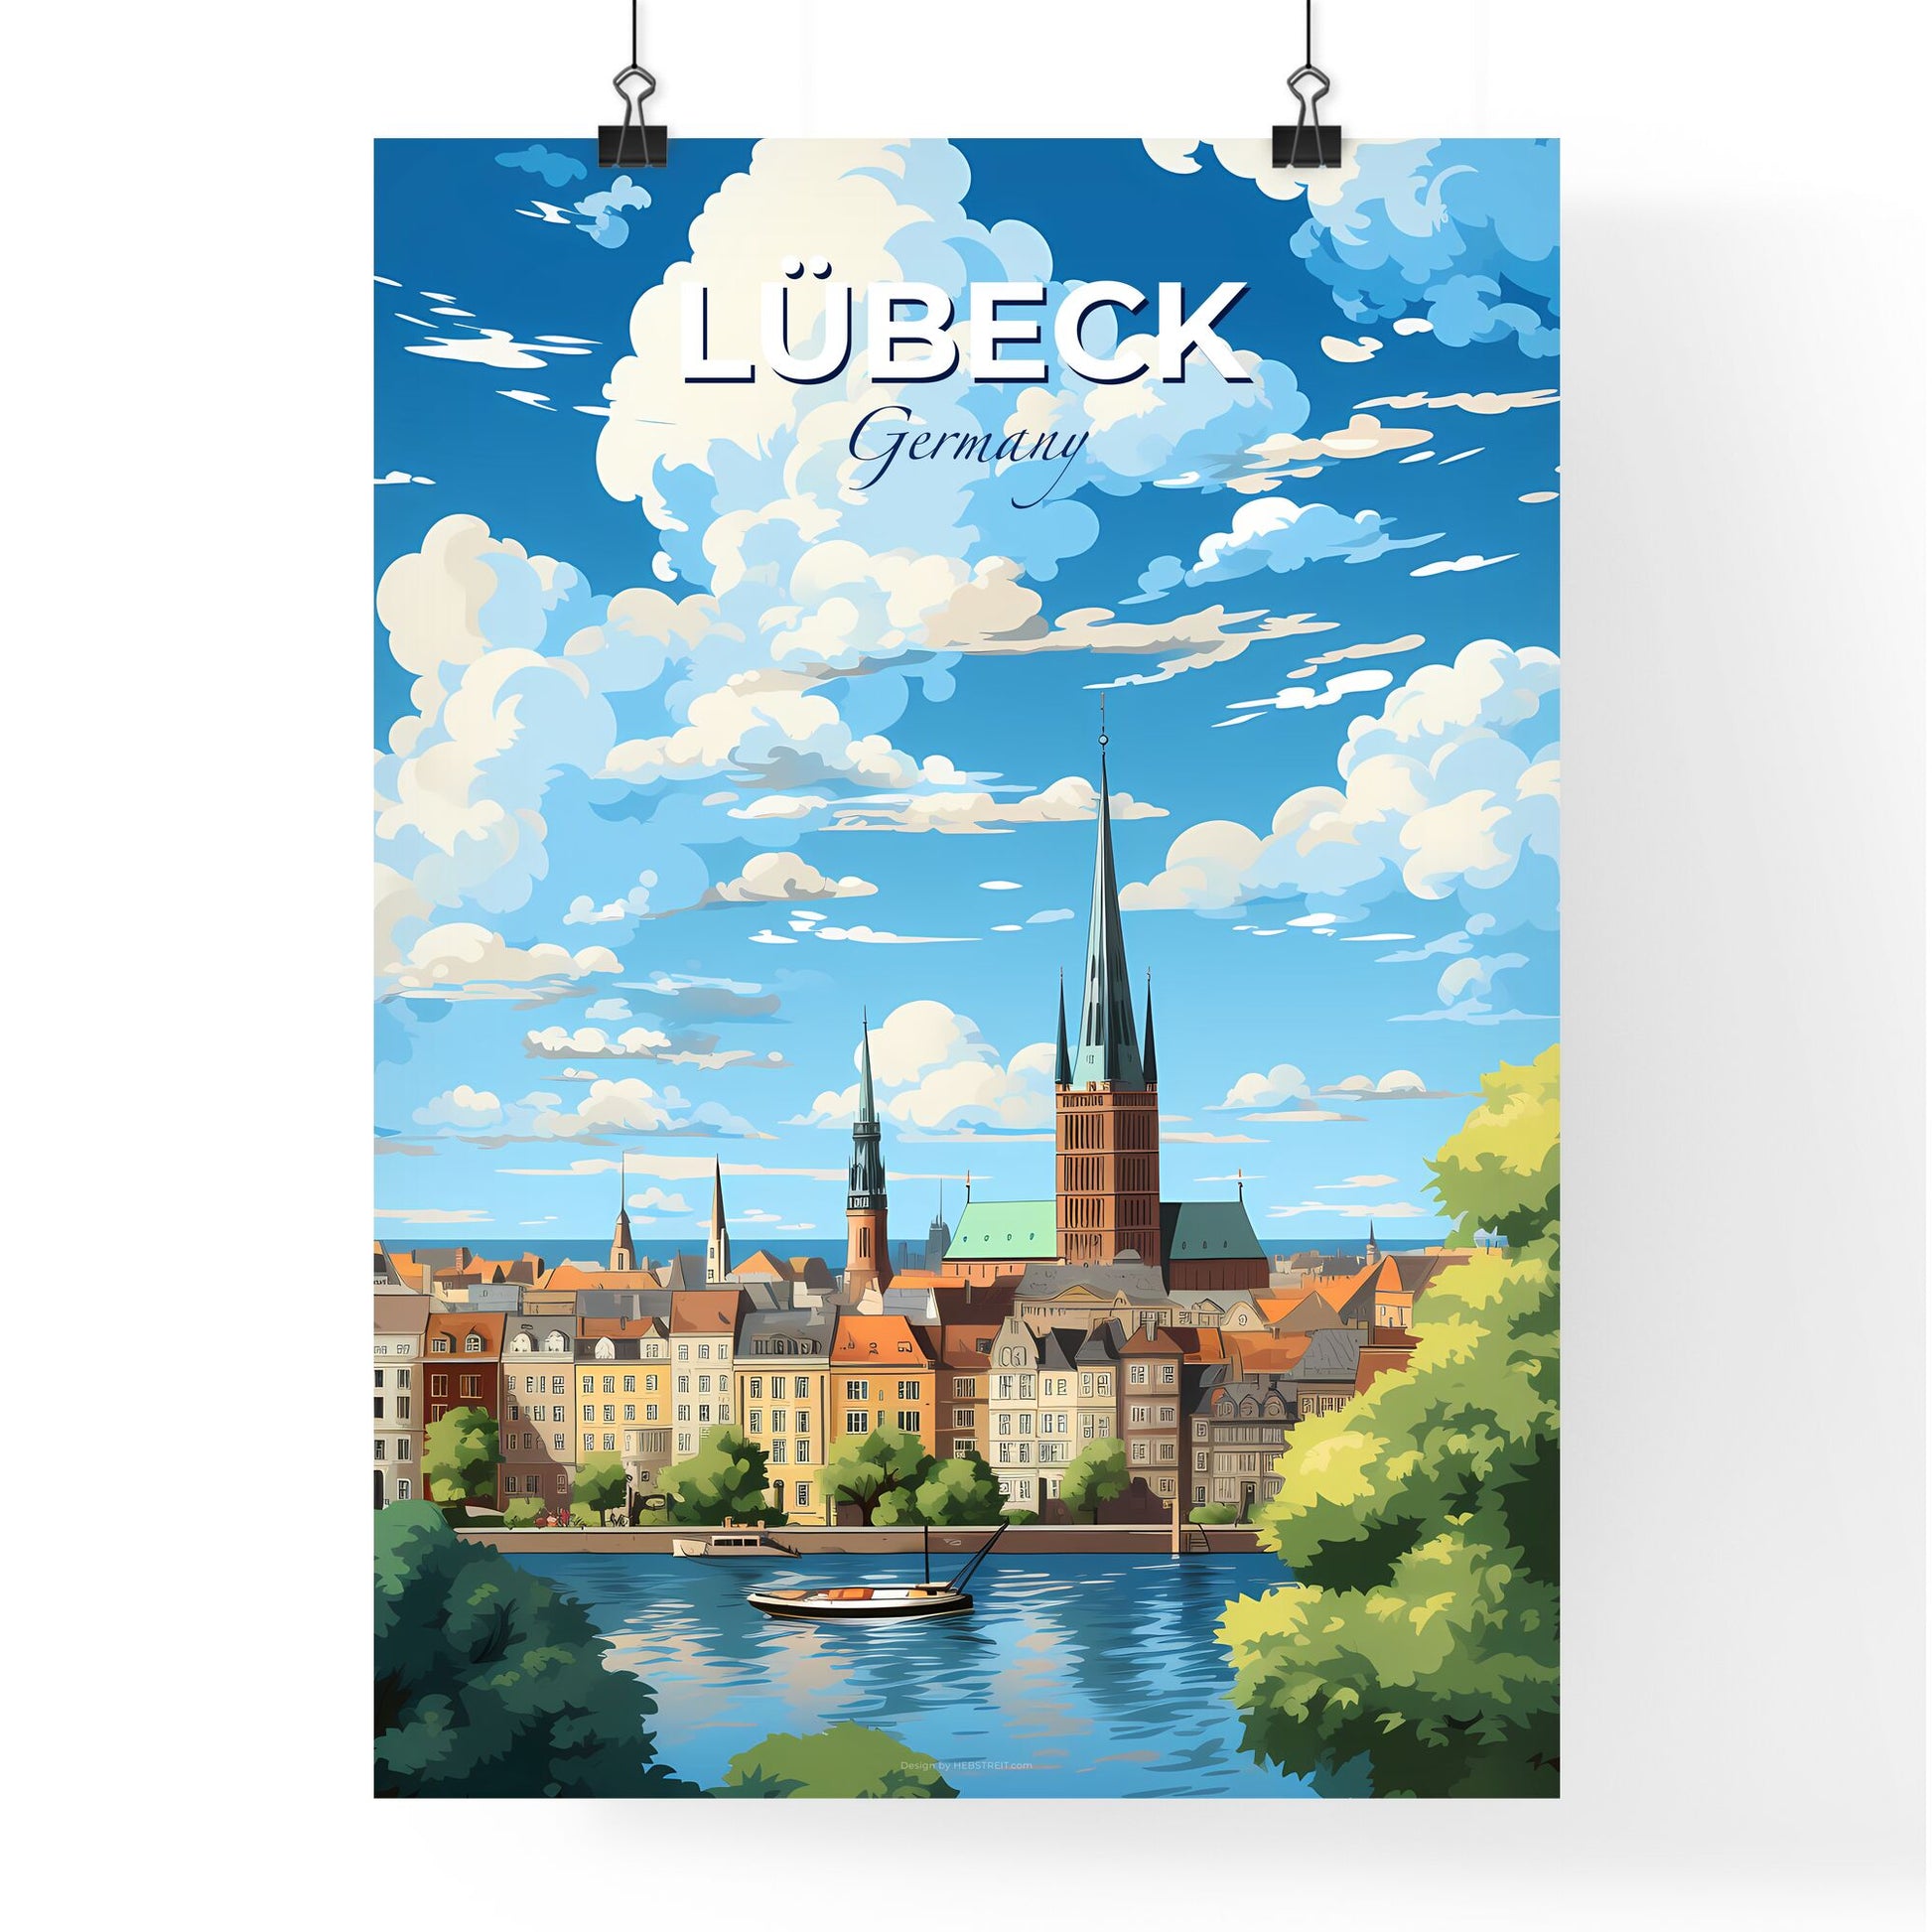 Lubeck Germany Skyline - A City With A Boat On The Water - Customizable Travel Gift Default Title